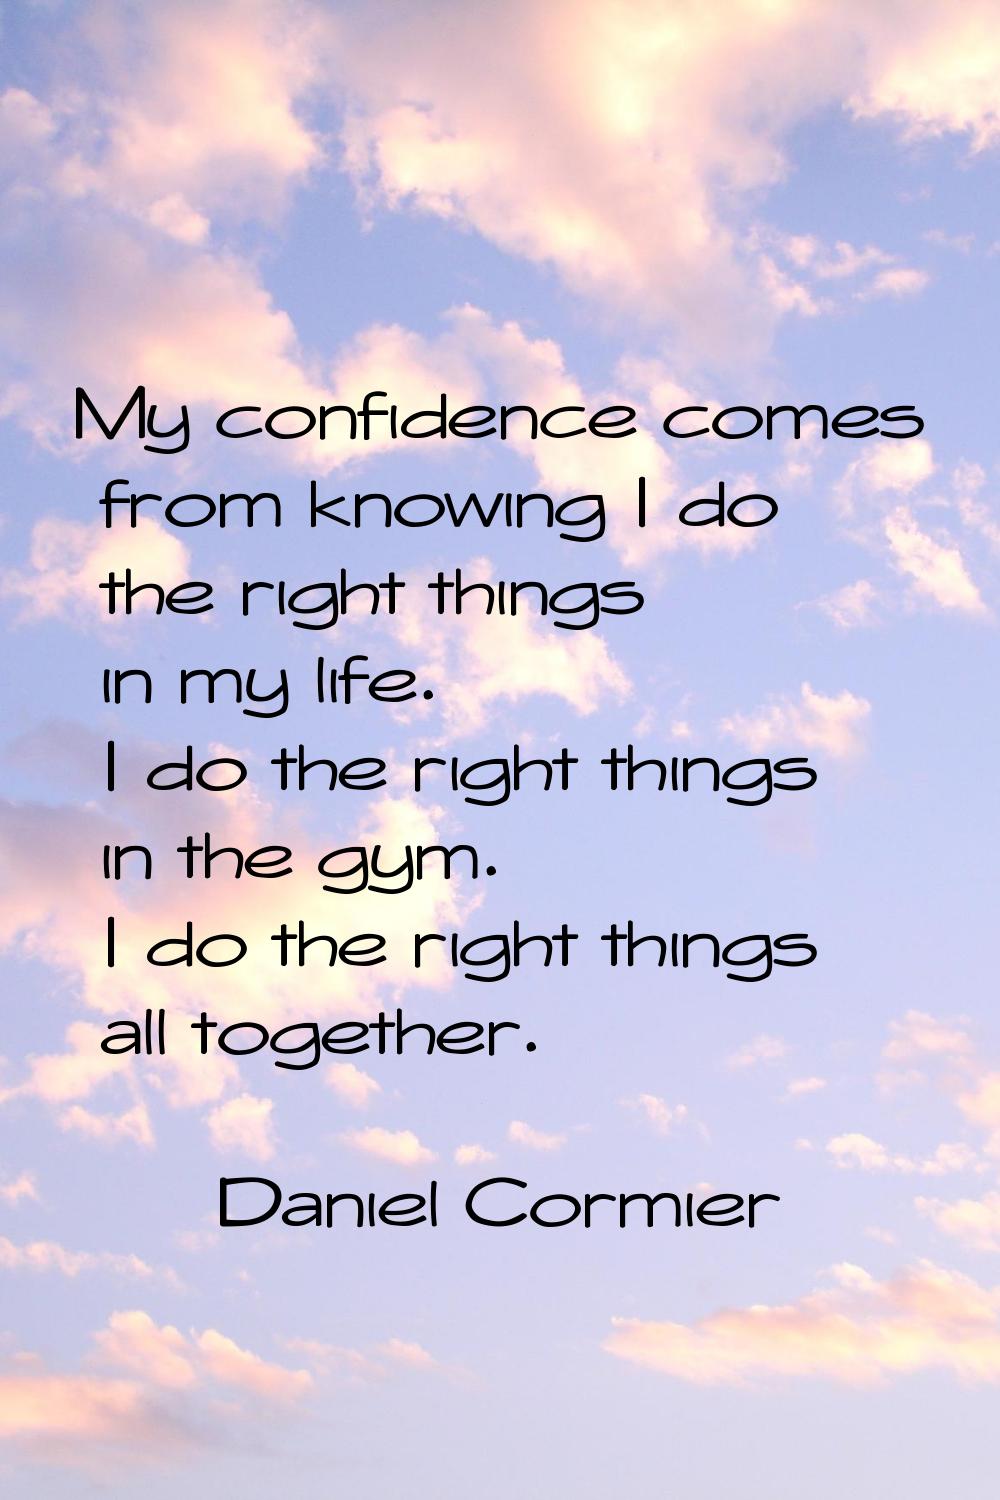 My confidence comes from knowing I do the right things in my life. I do the right things in the gym